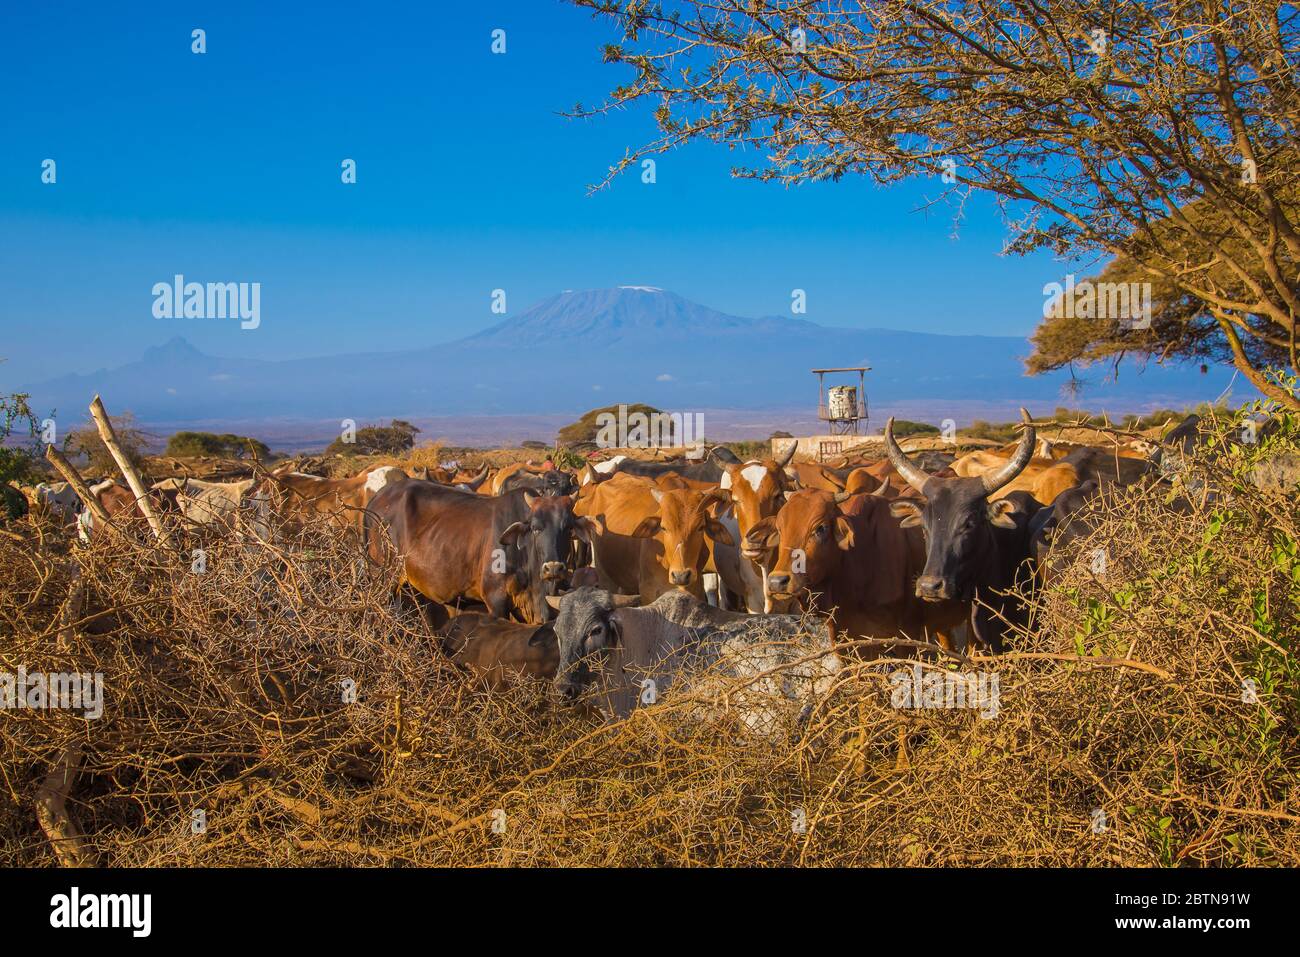 Farmland with sheep and Cows from Kenyan Village Stock Photo